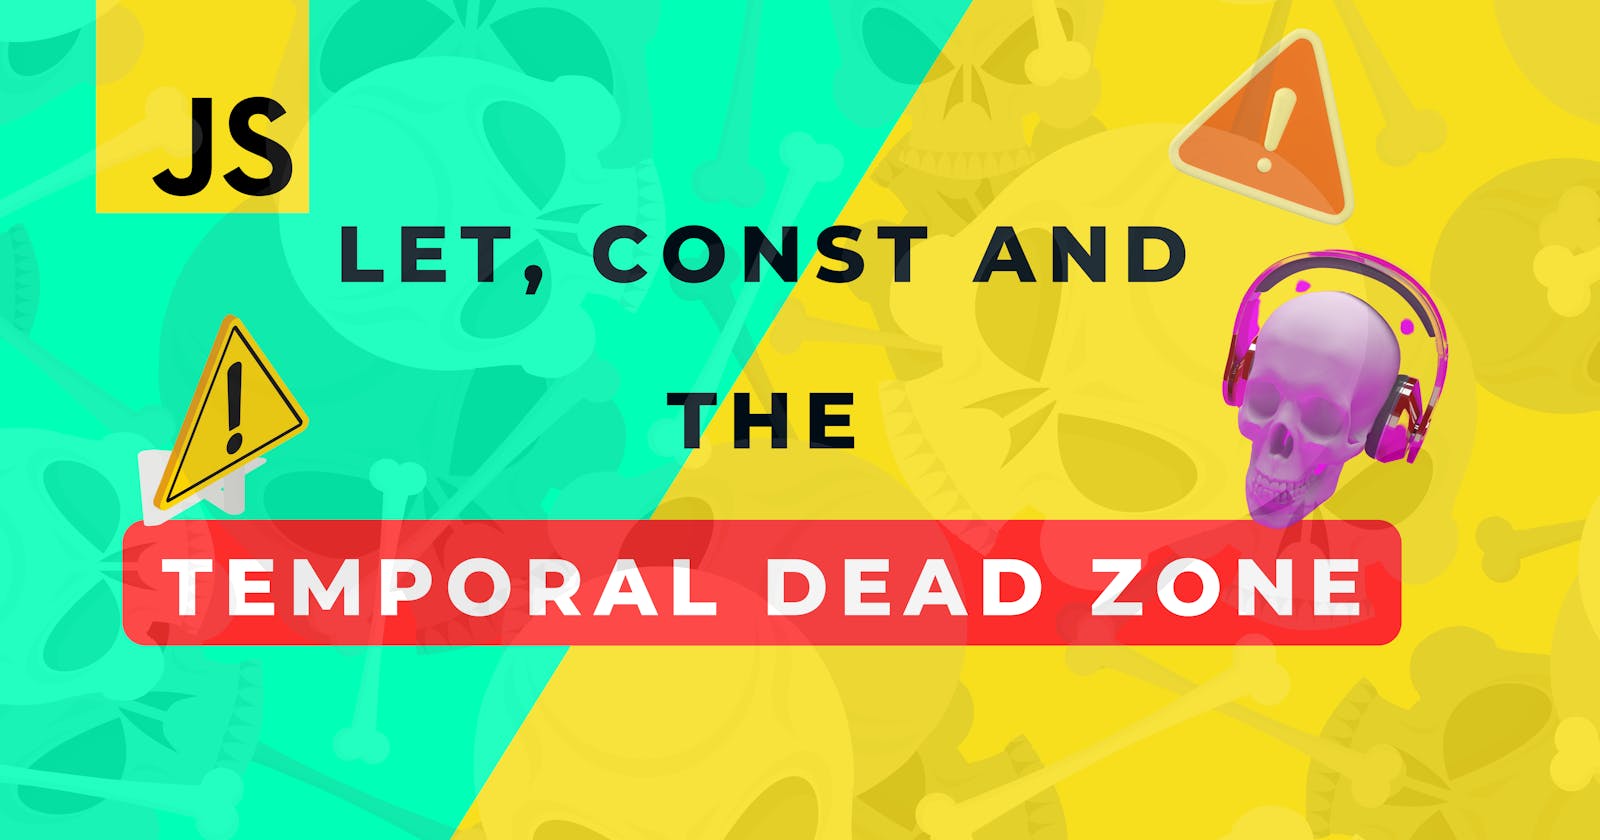 javascript: let, const, and the temporal dead zone